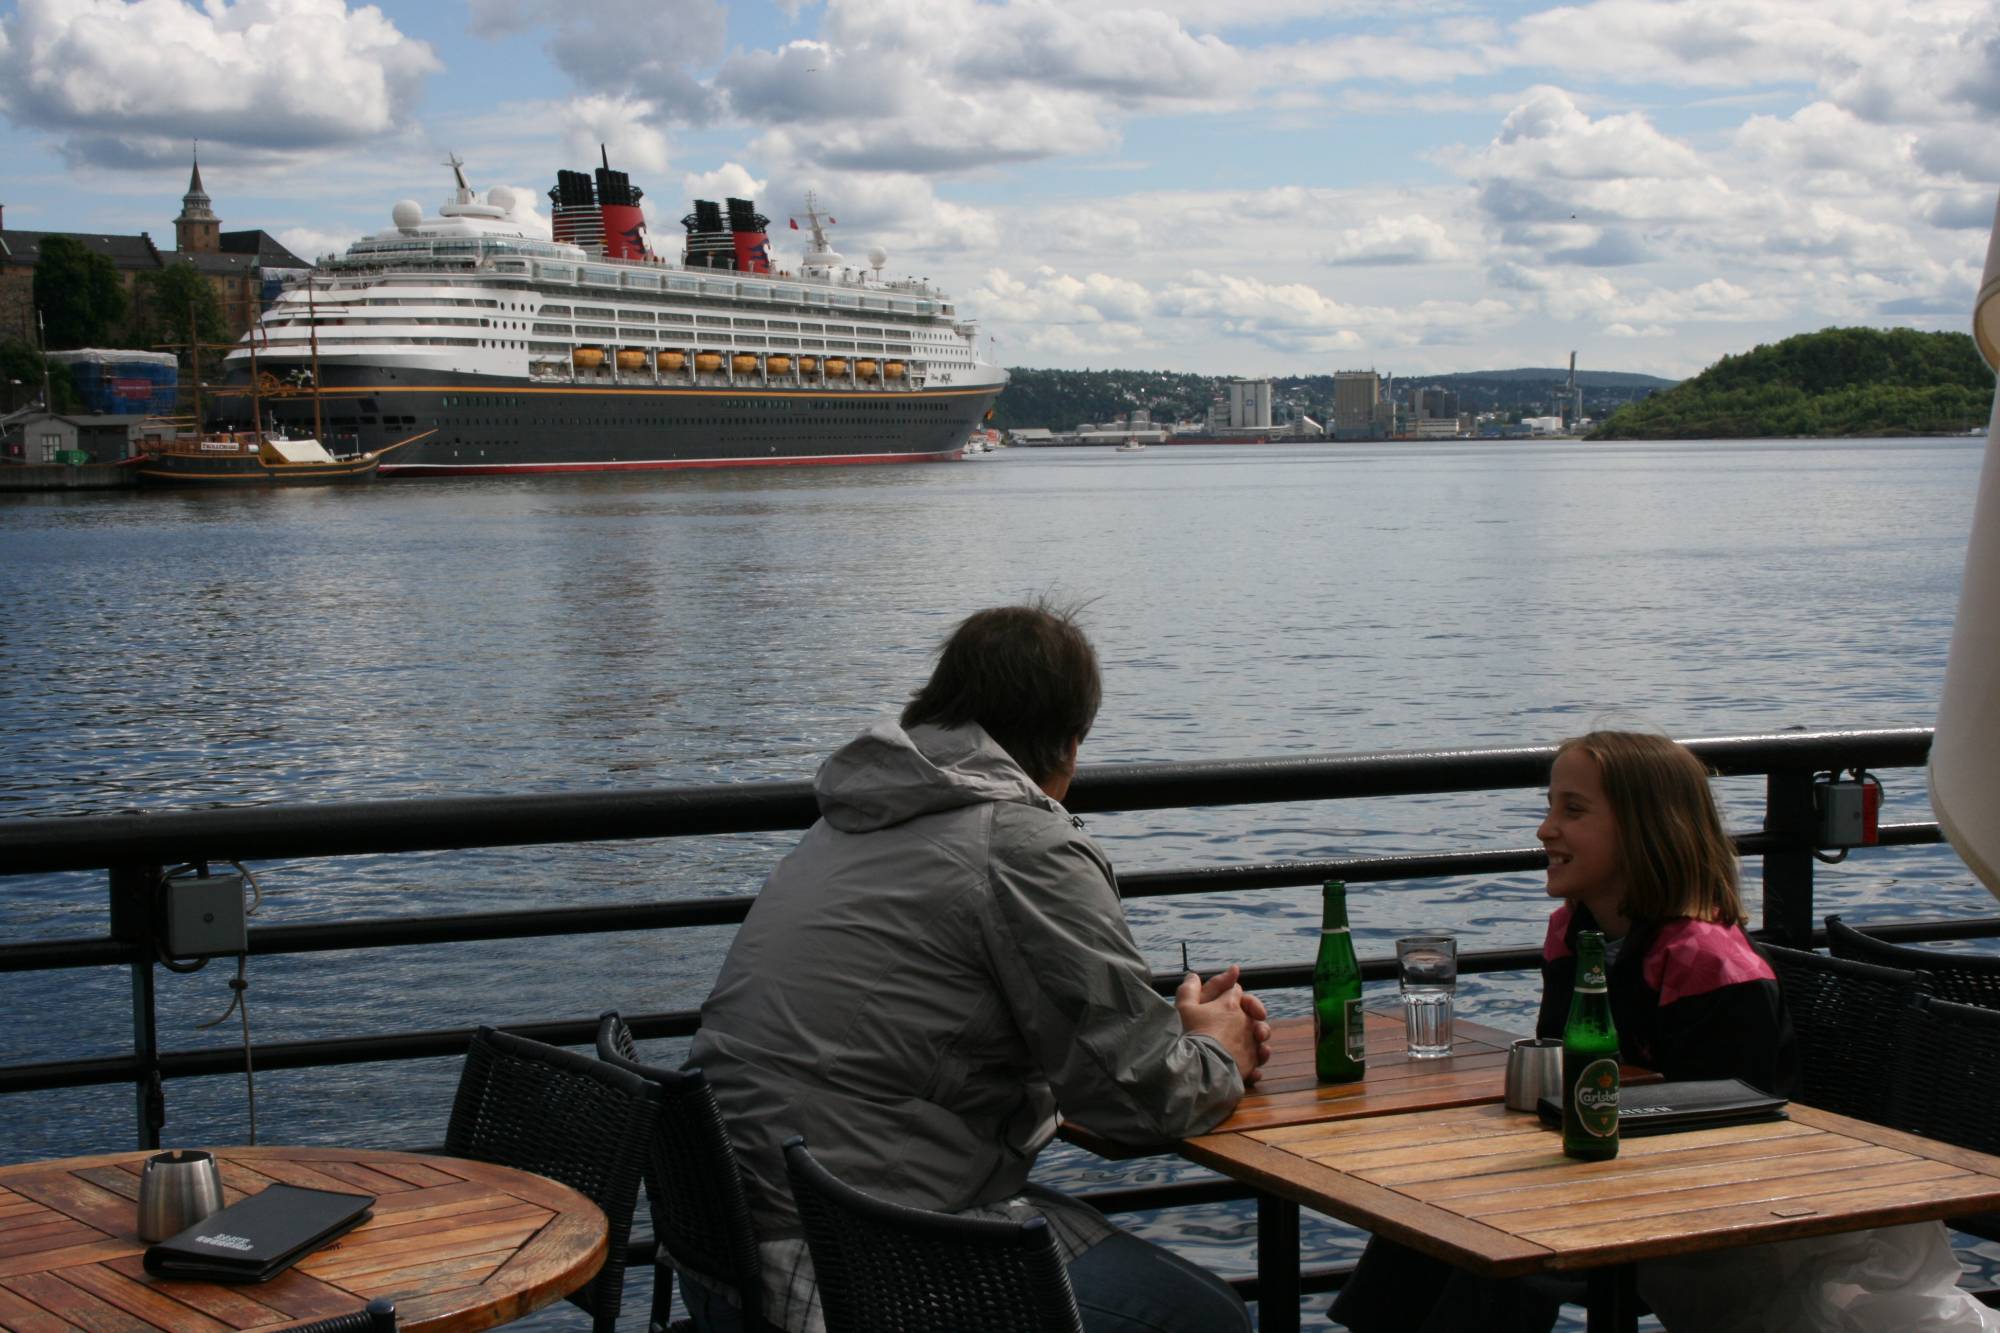 A view of the Disney Magic on its Inaugural voyage to Oslo, Norway